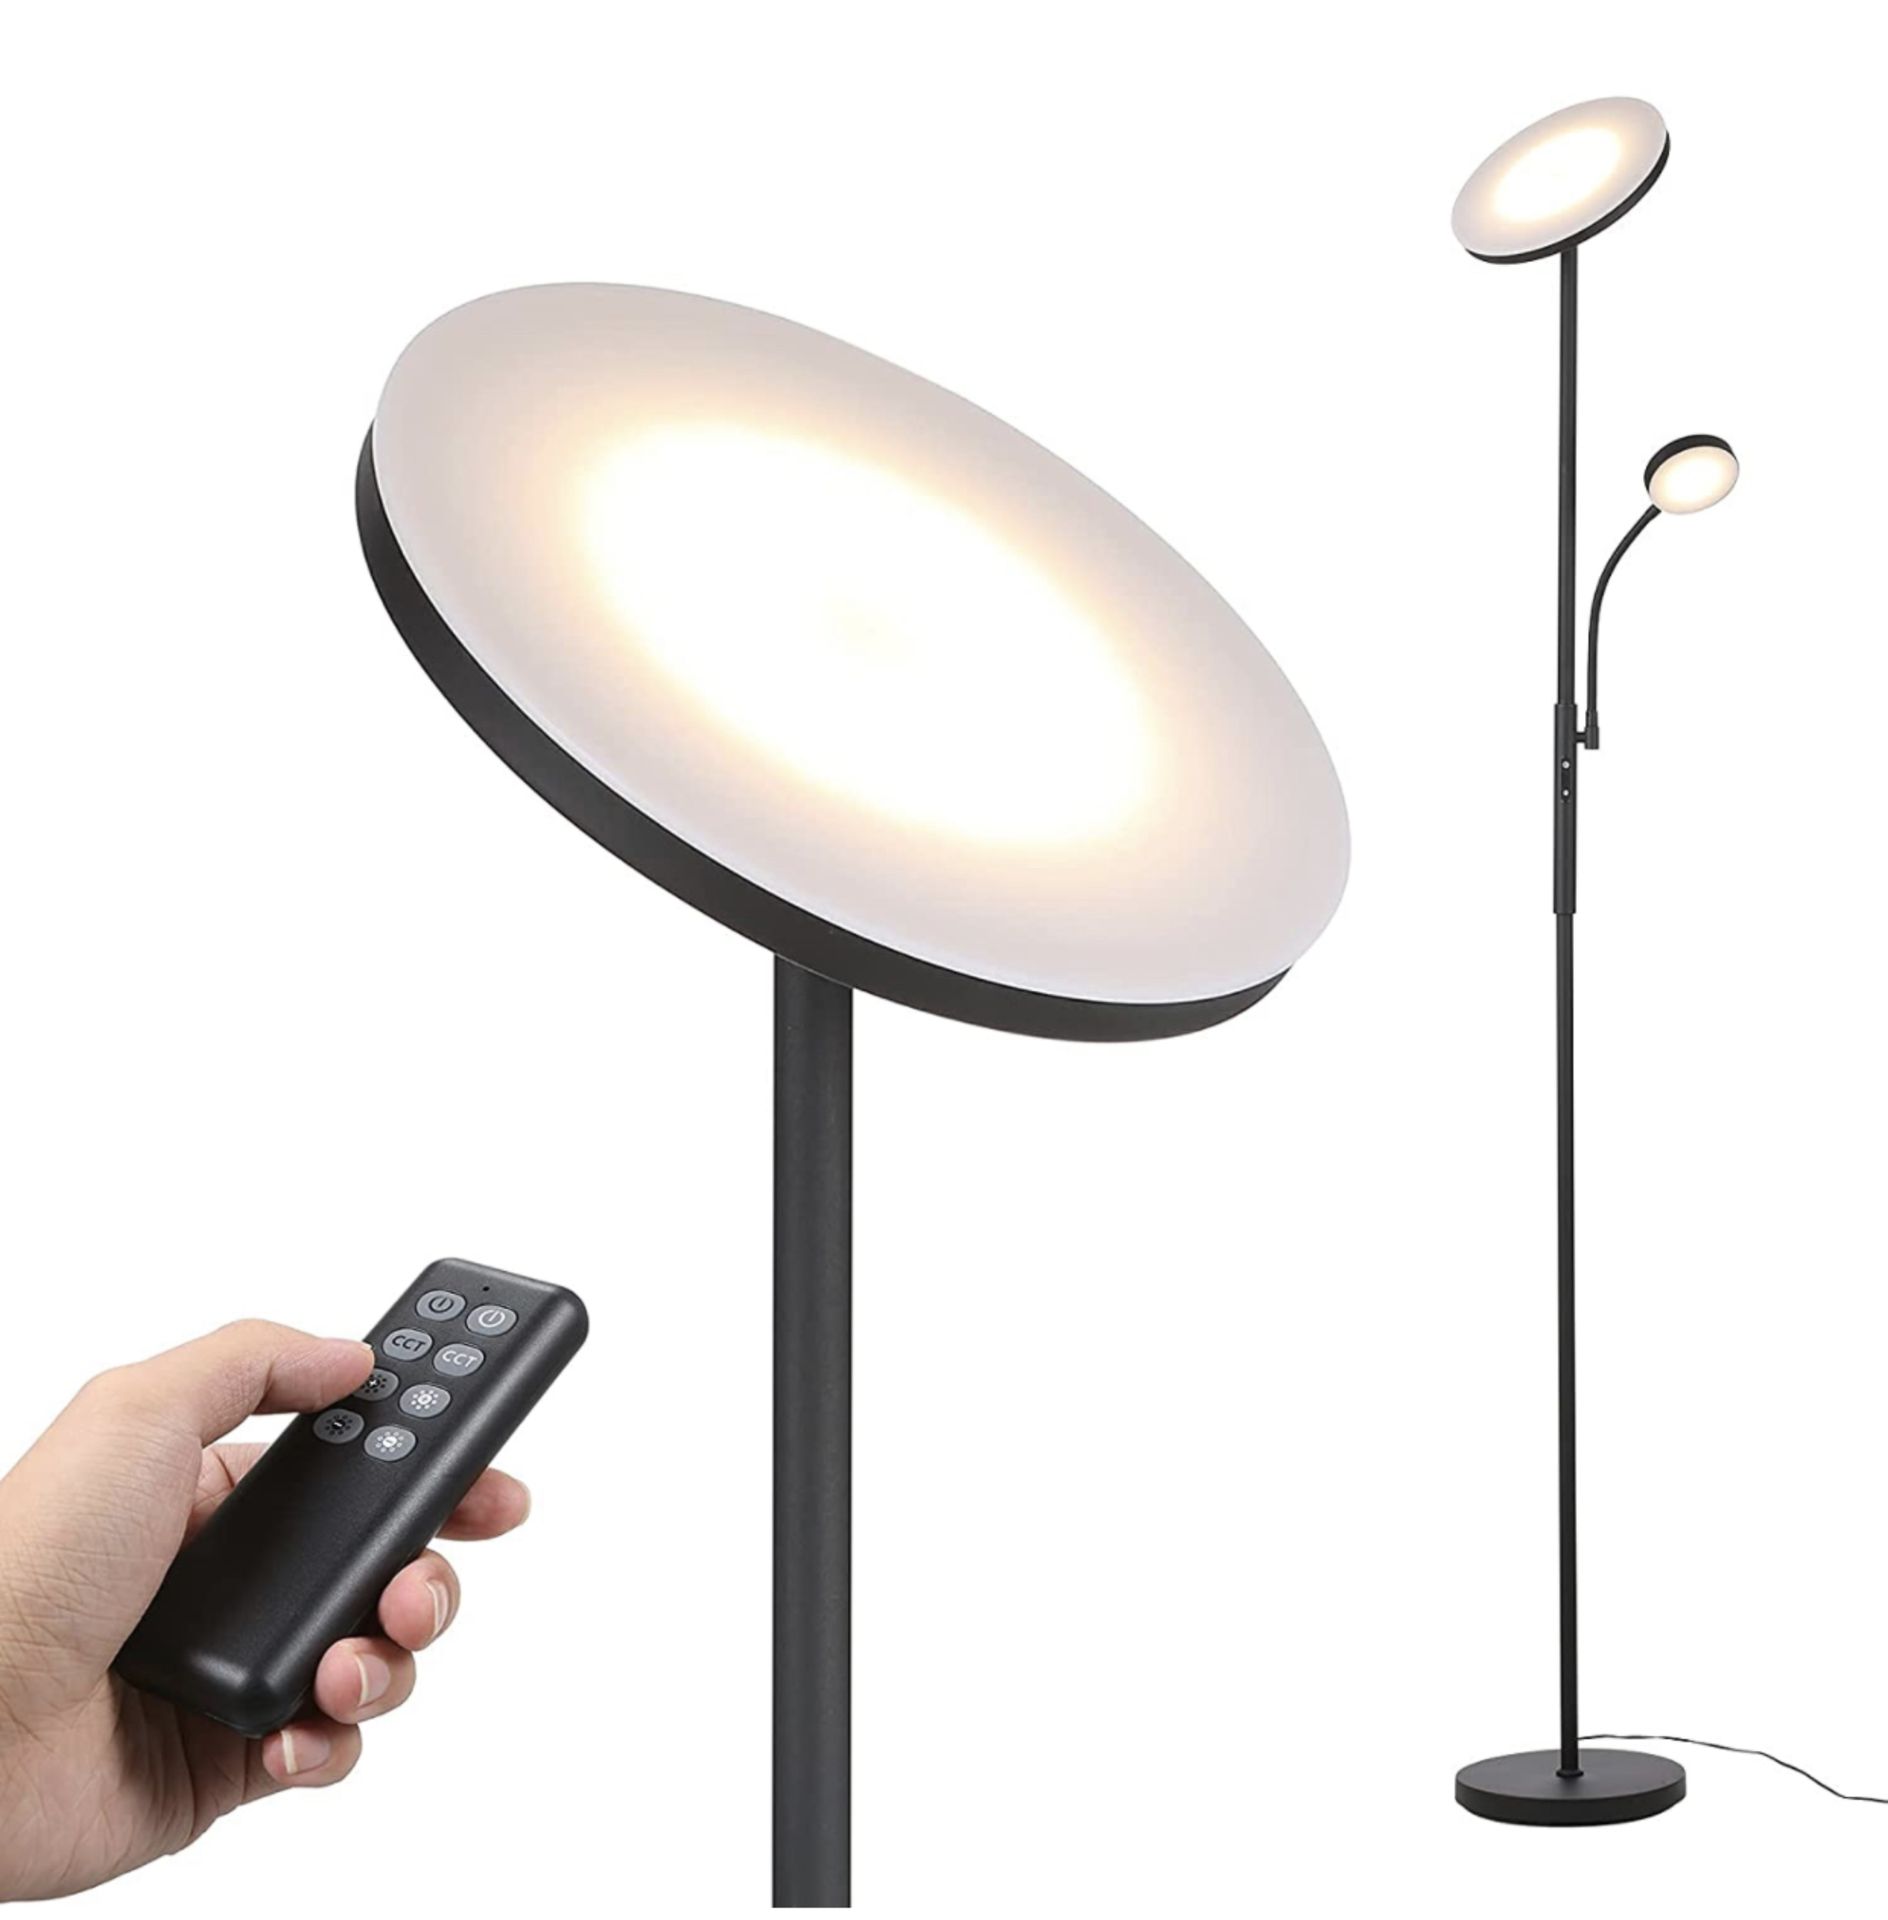 Tomshine Sky LED Touching & Reading Floor Lamp with Remote Control RRP £62.99